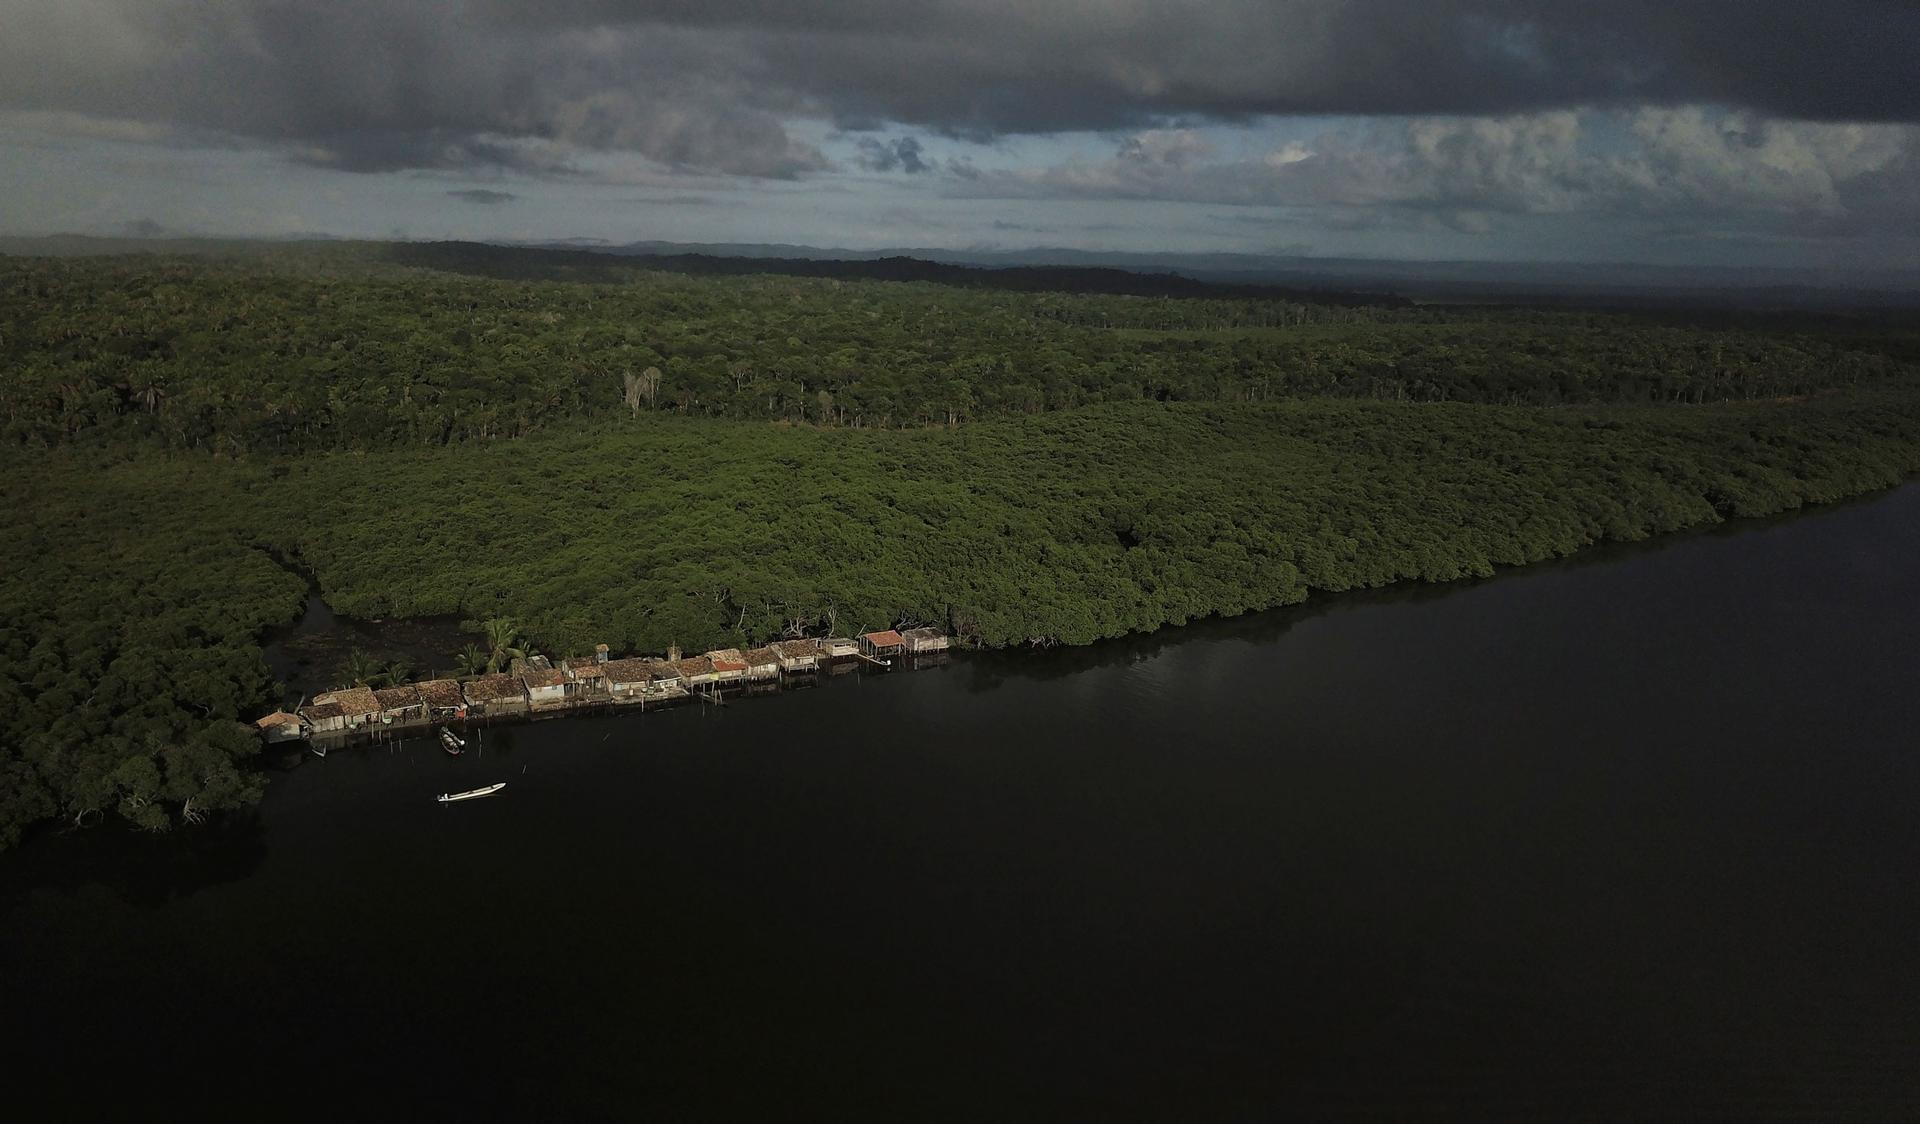 A photograph taken from above shows a small village set alongside a mangrove forest.